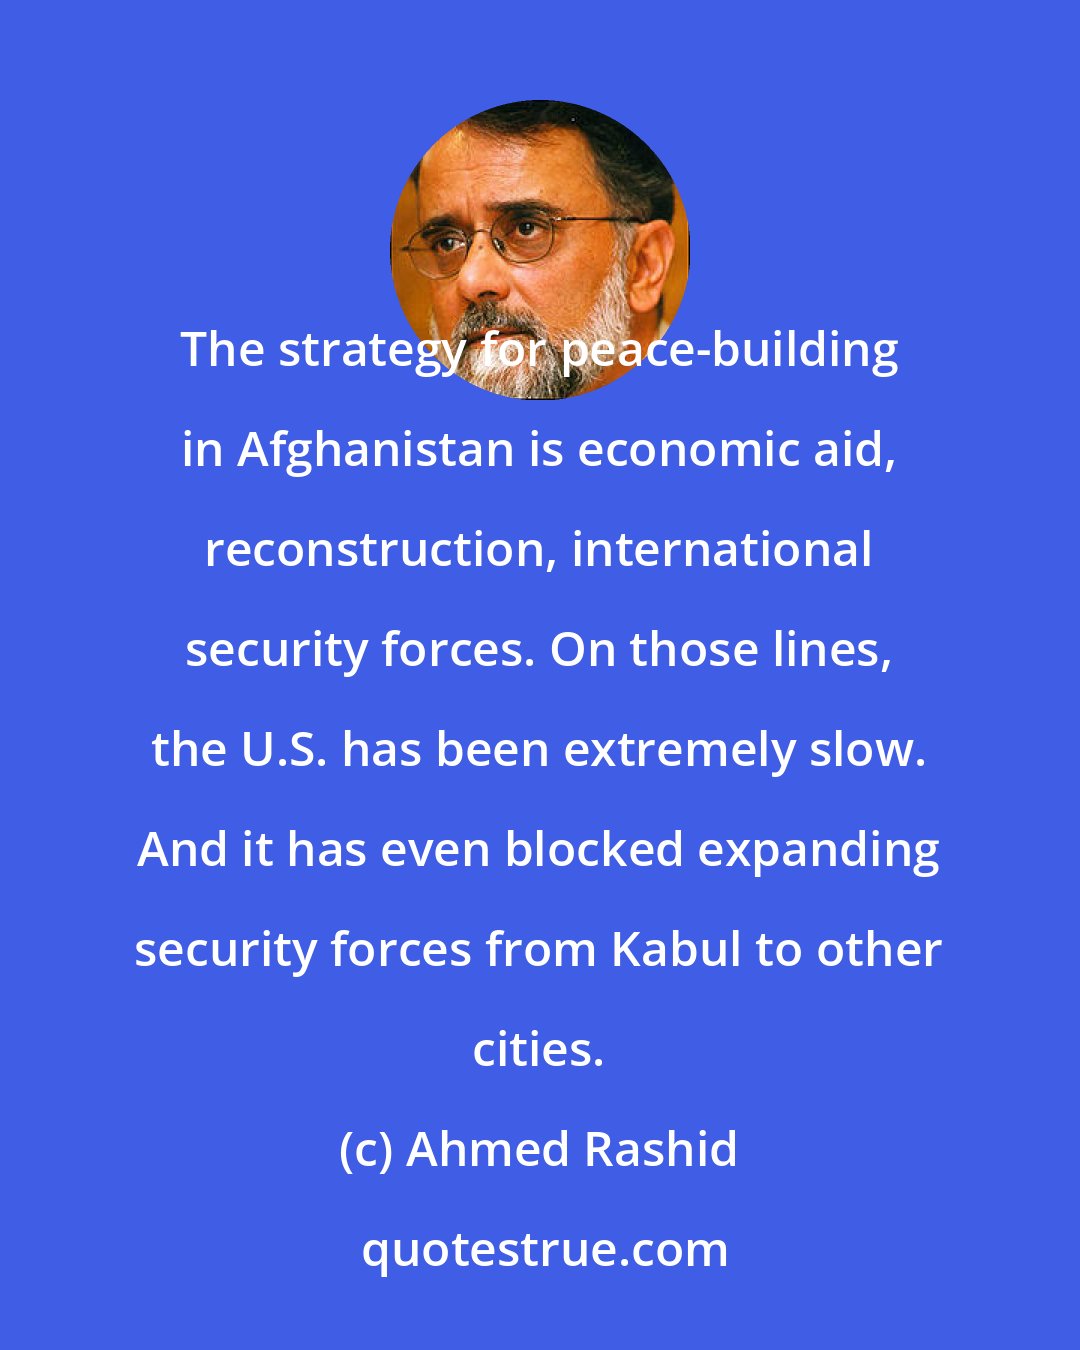 Ahmed Rashid: The strategy for peace-building in Afghanistan is economic aid, reconstruction, international security forces. On those lines, the U.S. has been extremely slow. And it has even blocked expanding security forces from Kabul to other cities.